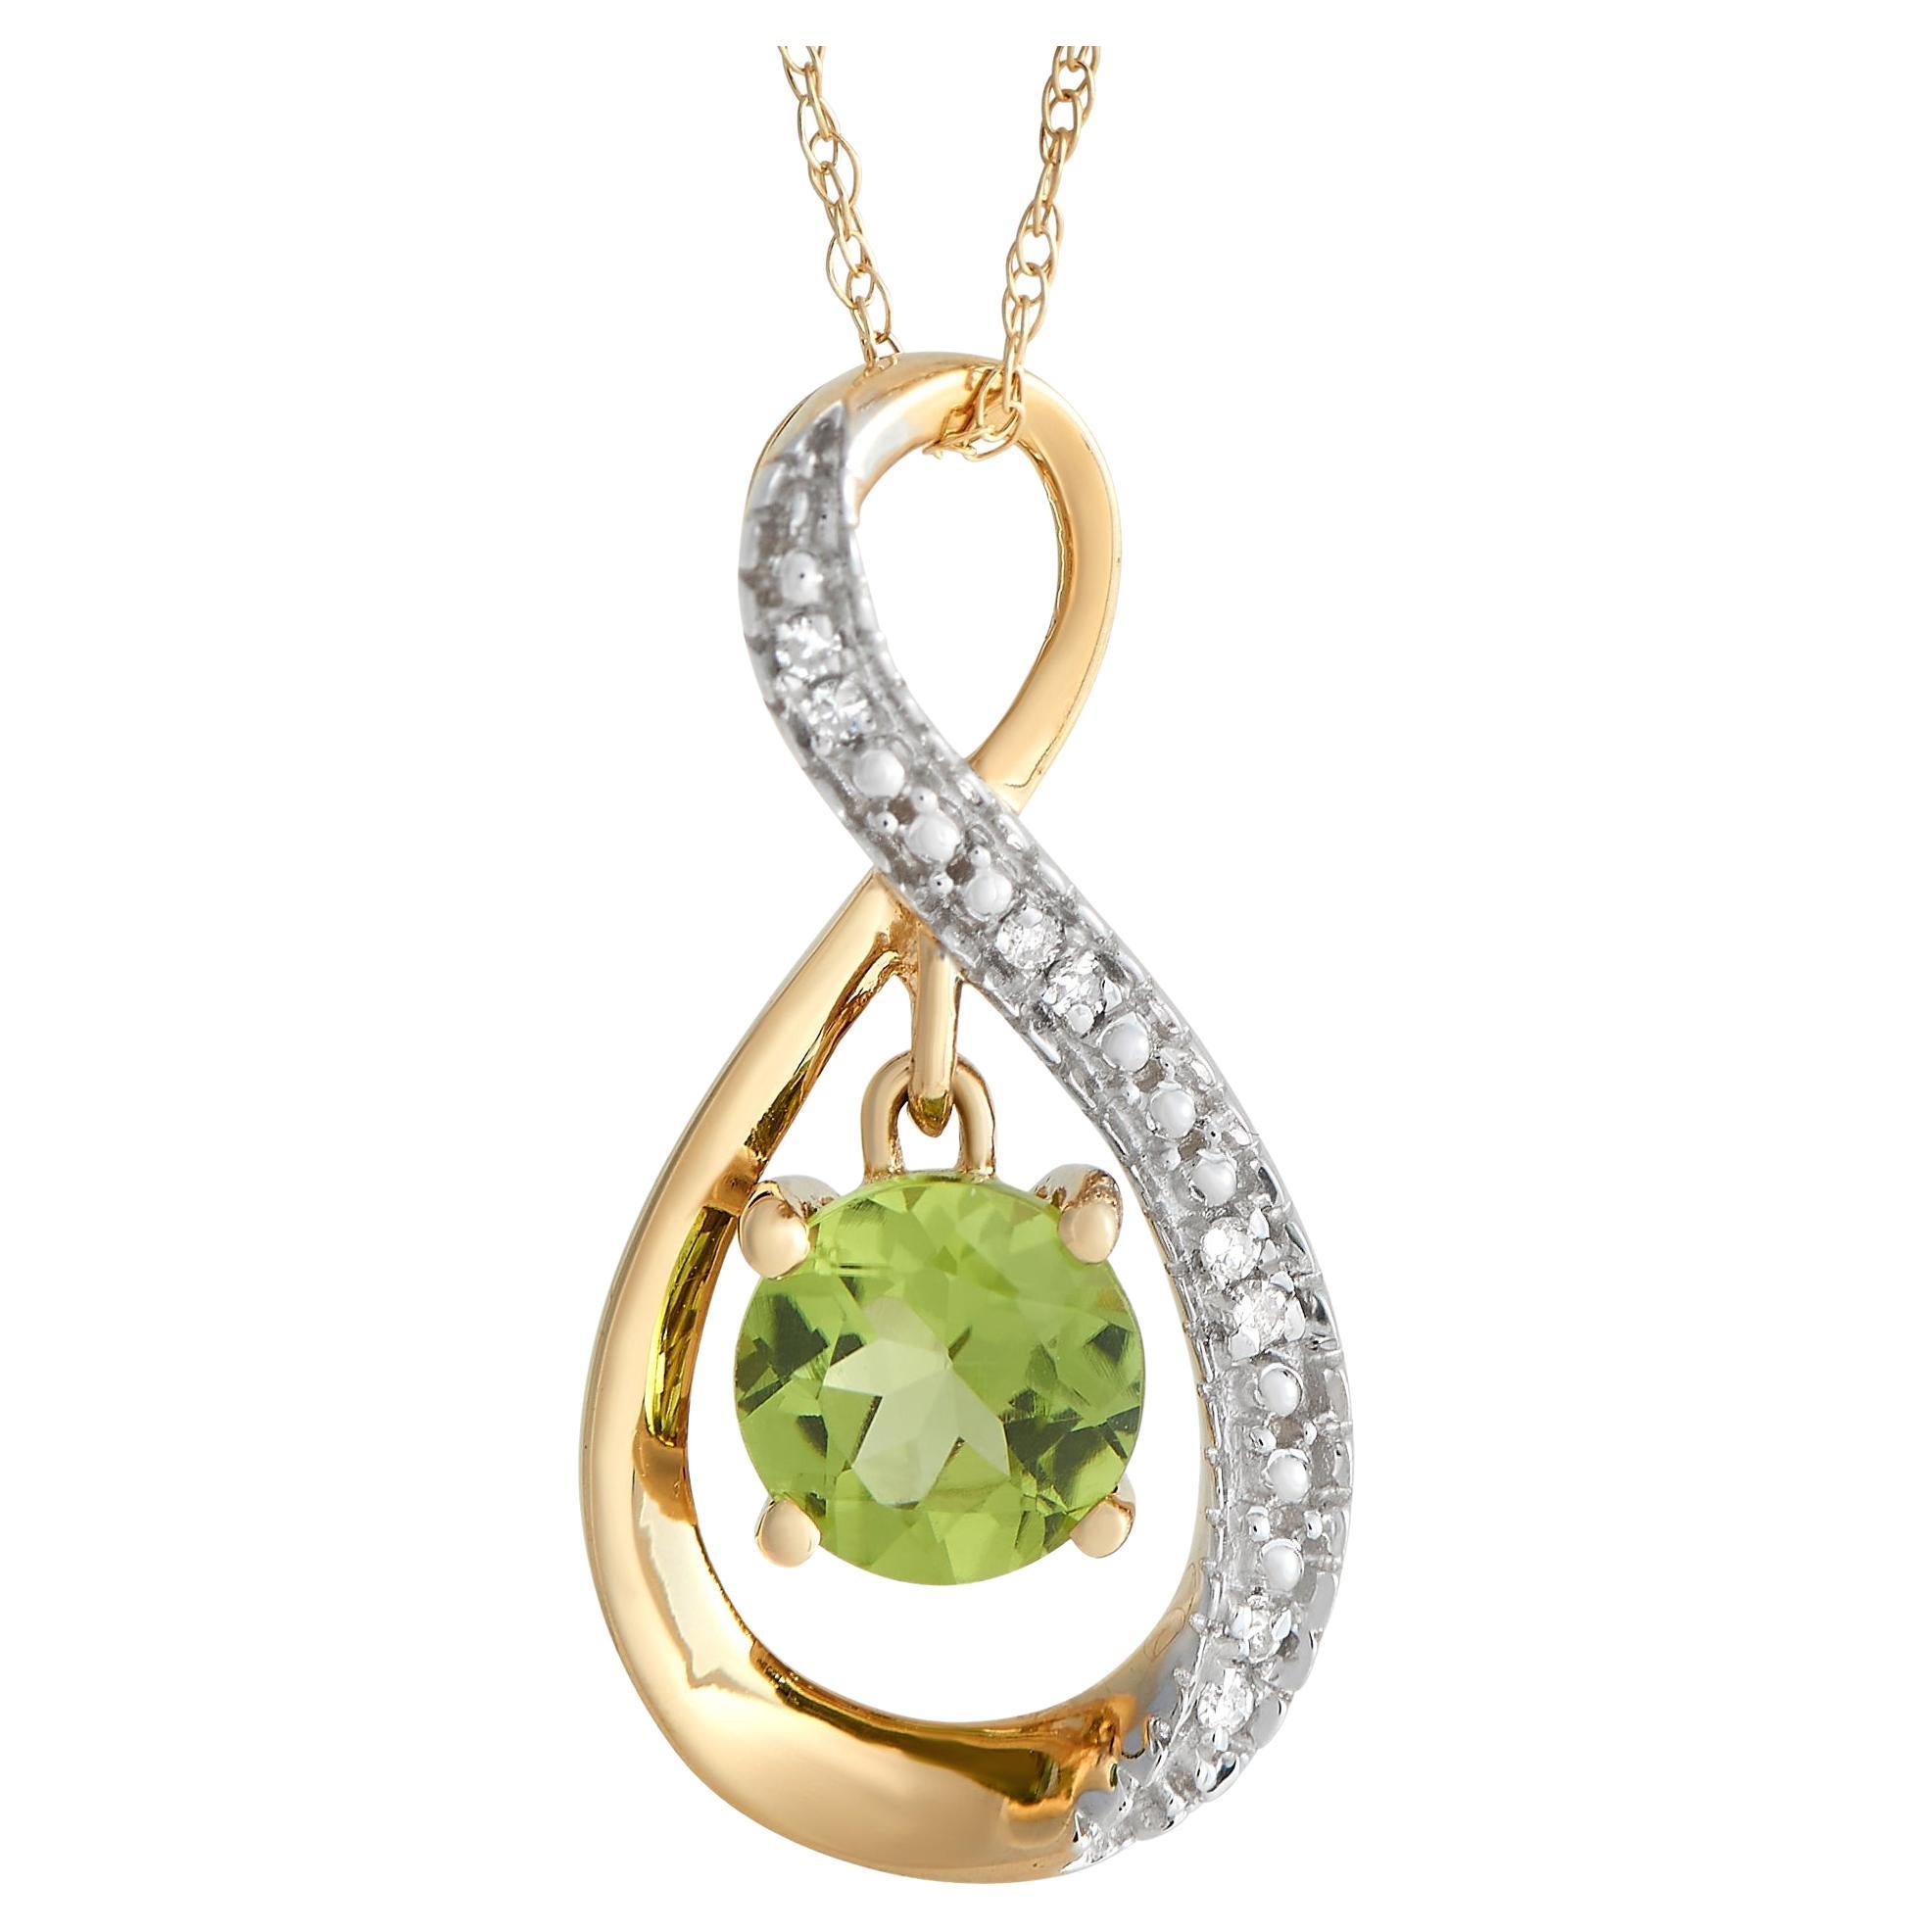 LB Exclusive 14K Yellow Gold 0.03 ct Diamond and Peridot Necklace For Sale